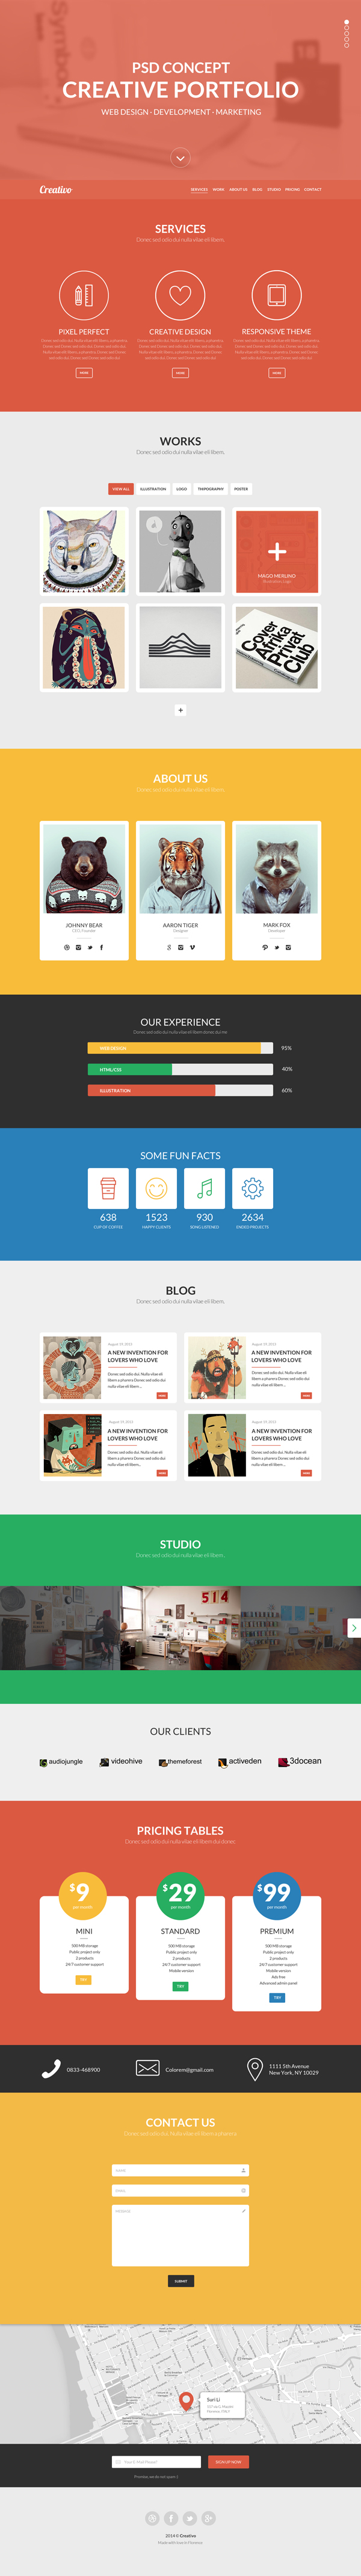 Free One Page Website Template